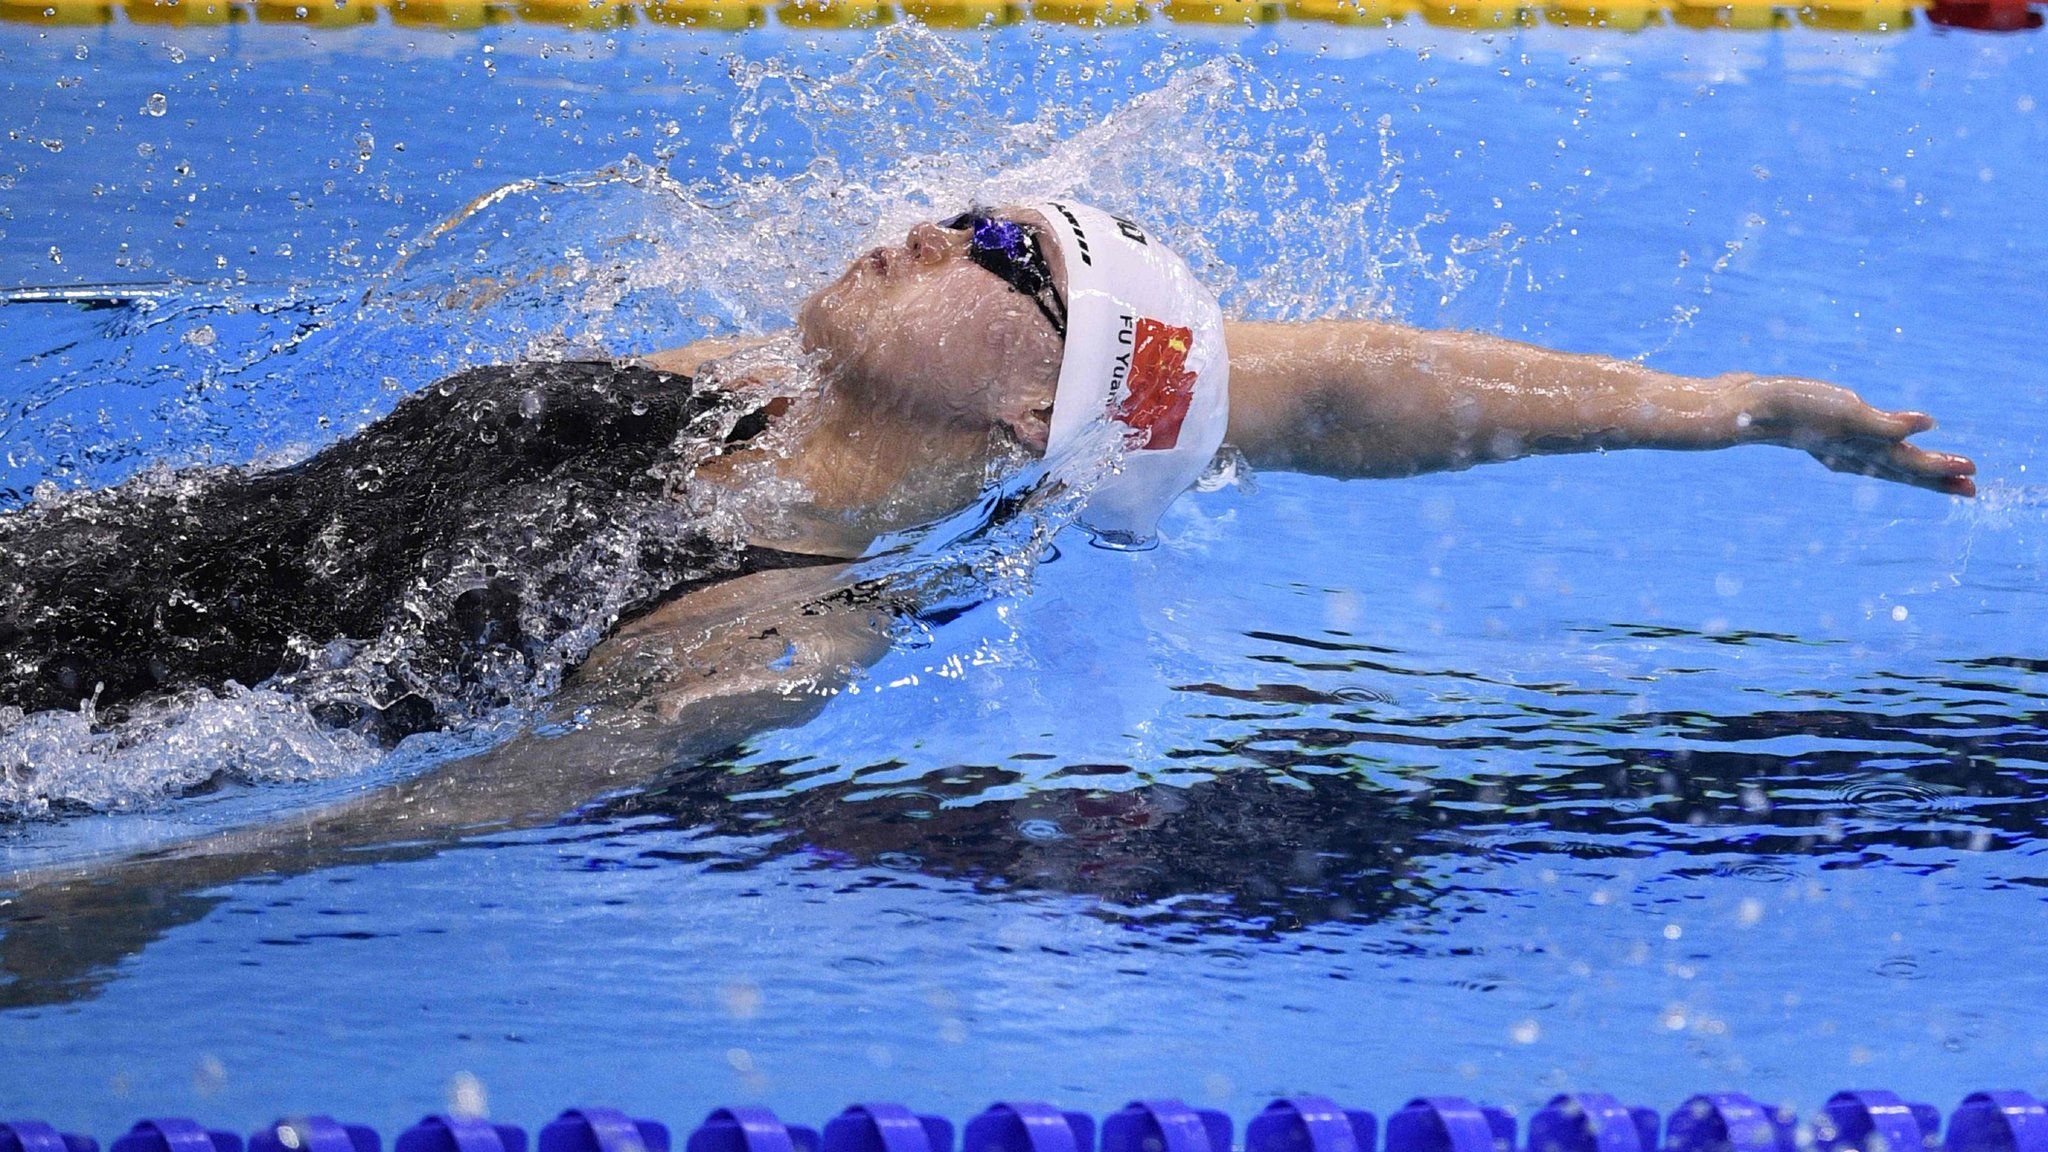 China"s Fu Yuanhui competes in the Women"s 100m Backstroke Final during the swimming event at the Rio 2016 Olympic Games at the Olympic Aquatics Stadium in Rio de Janeiro on August 8, 2016.